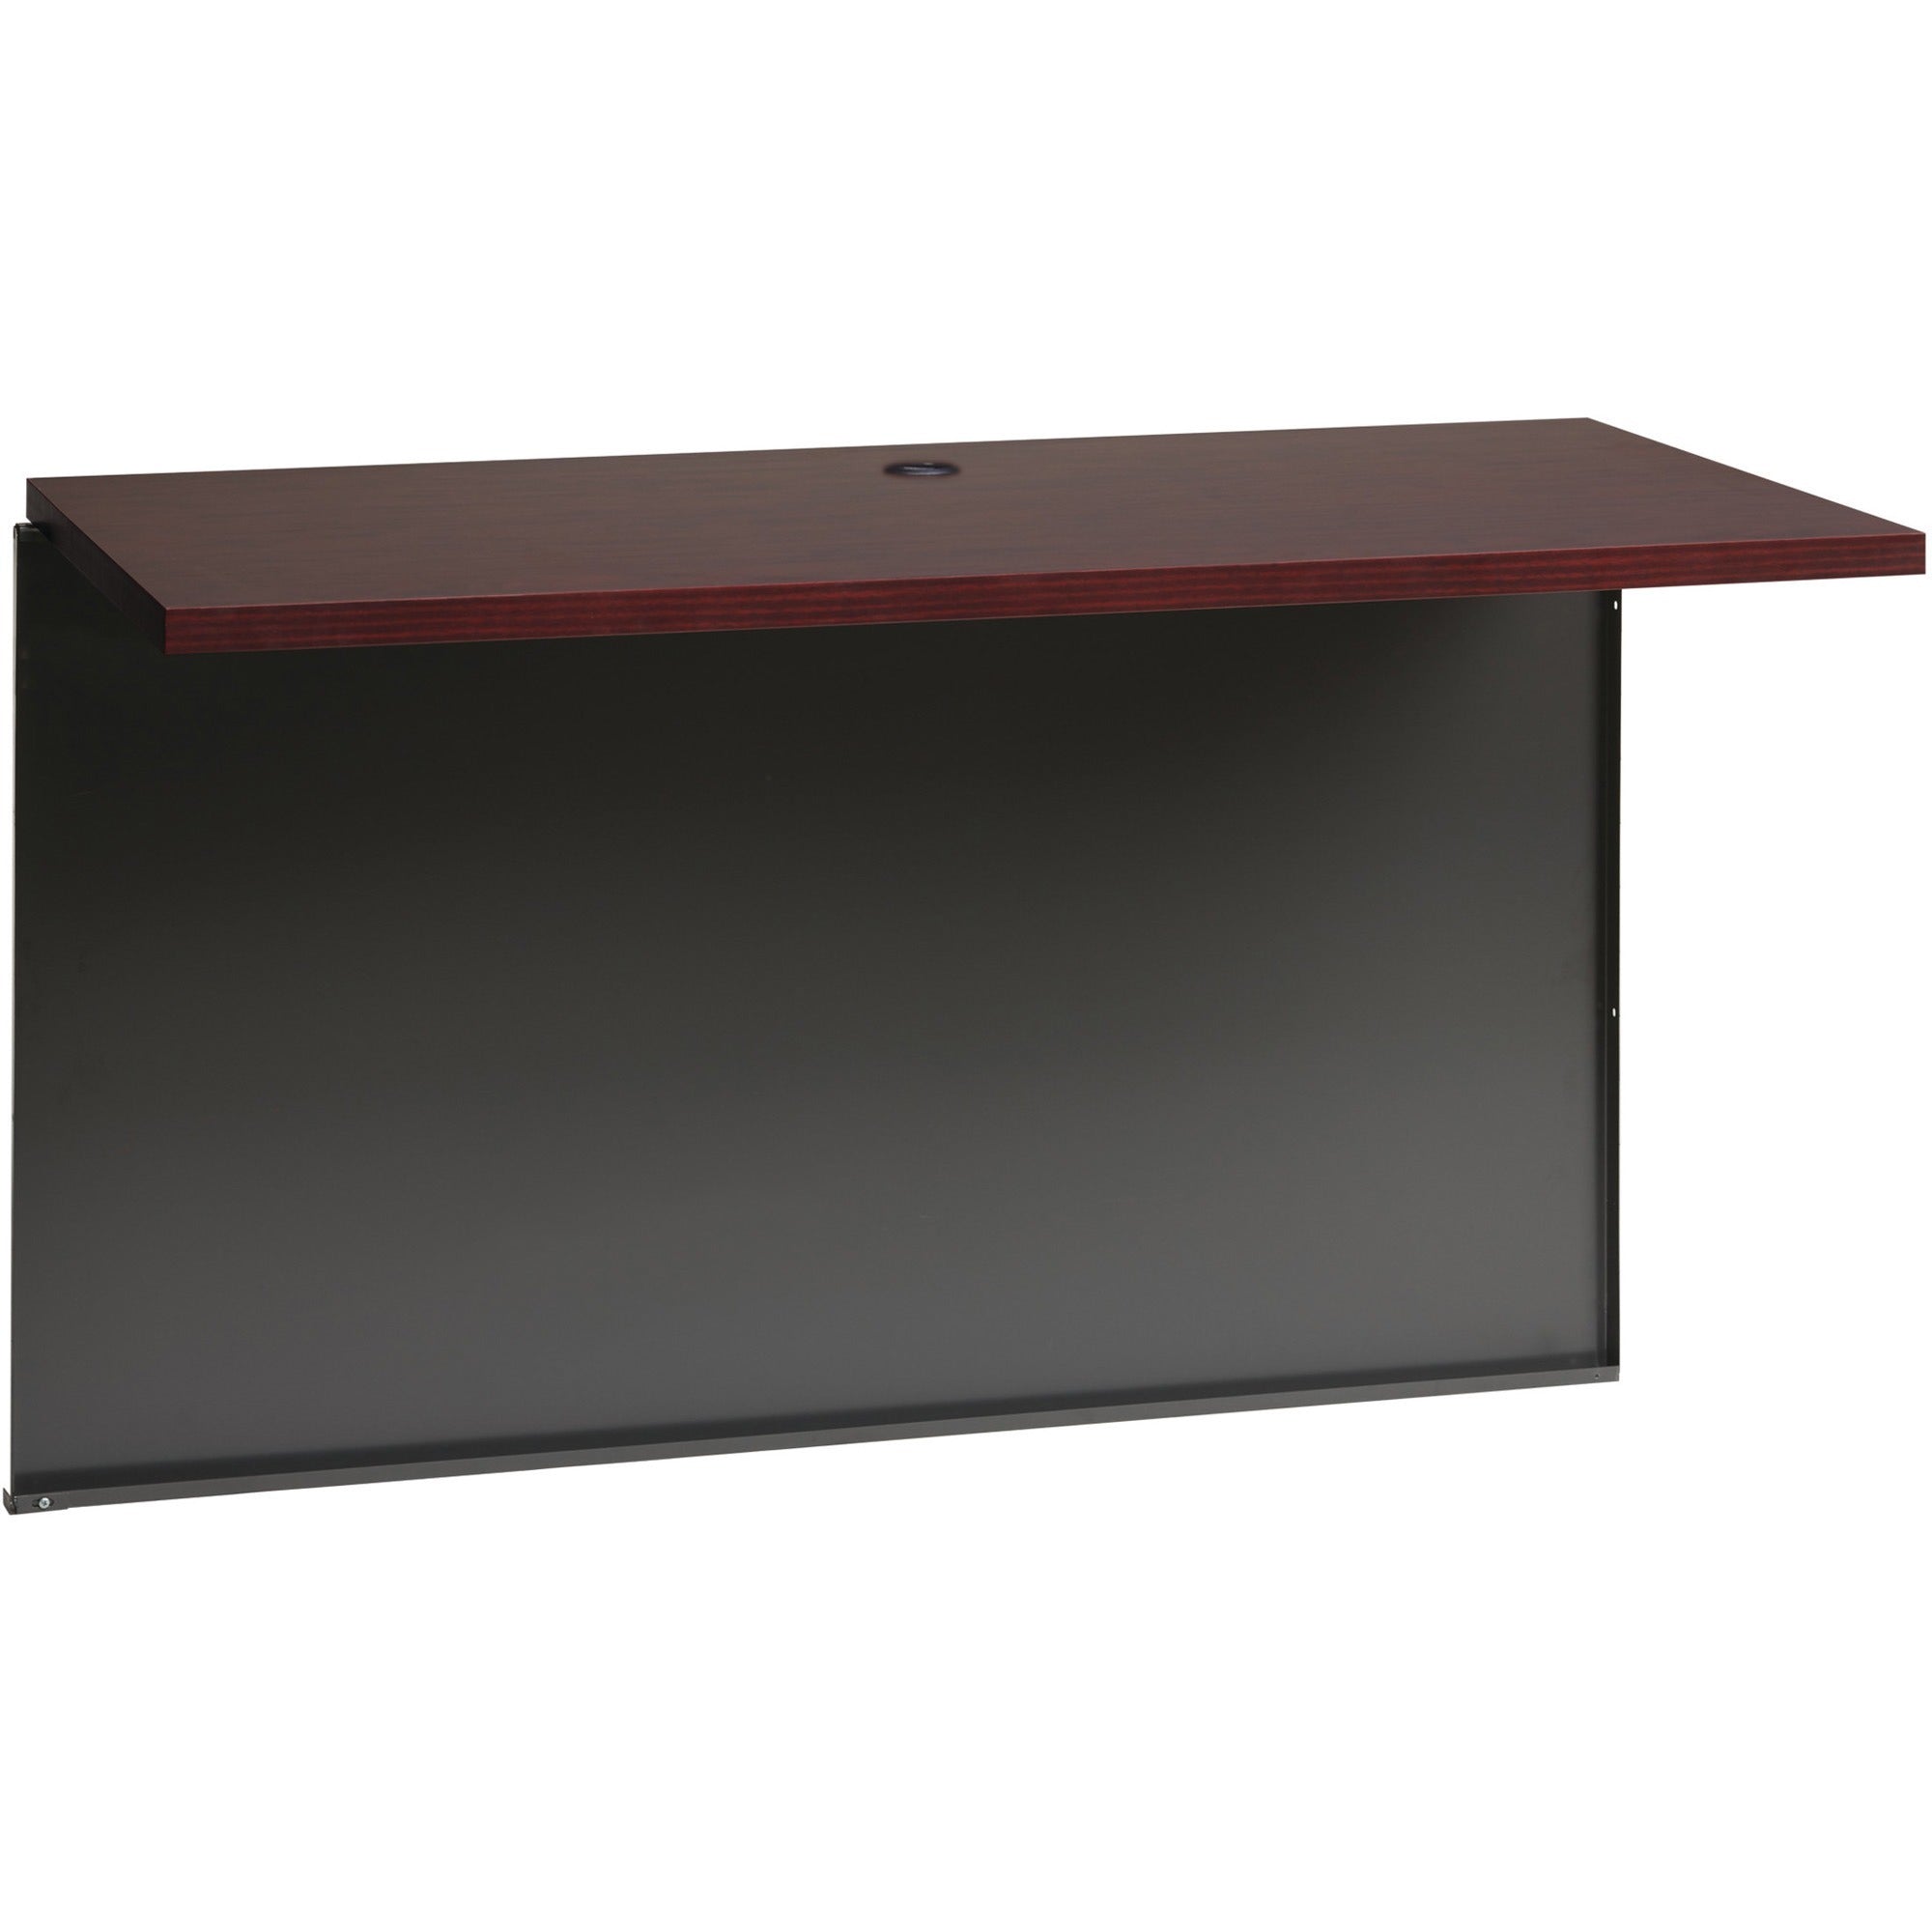 Lorell Fortress Modular Series Bridge - 48" x 24" , 1.1" Top - Material: Steel - Finish: Mahogany Laminate, Charcoal - Scratch Resistant, Stain Resistant, Ball-bearing Suspension, Grommet, Handle, Cord Management - 